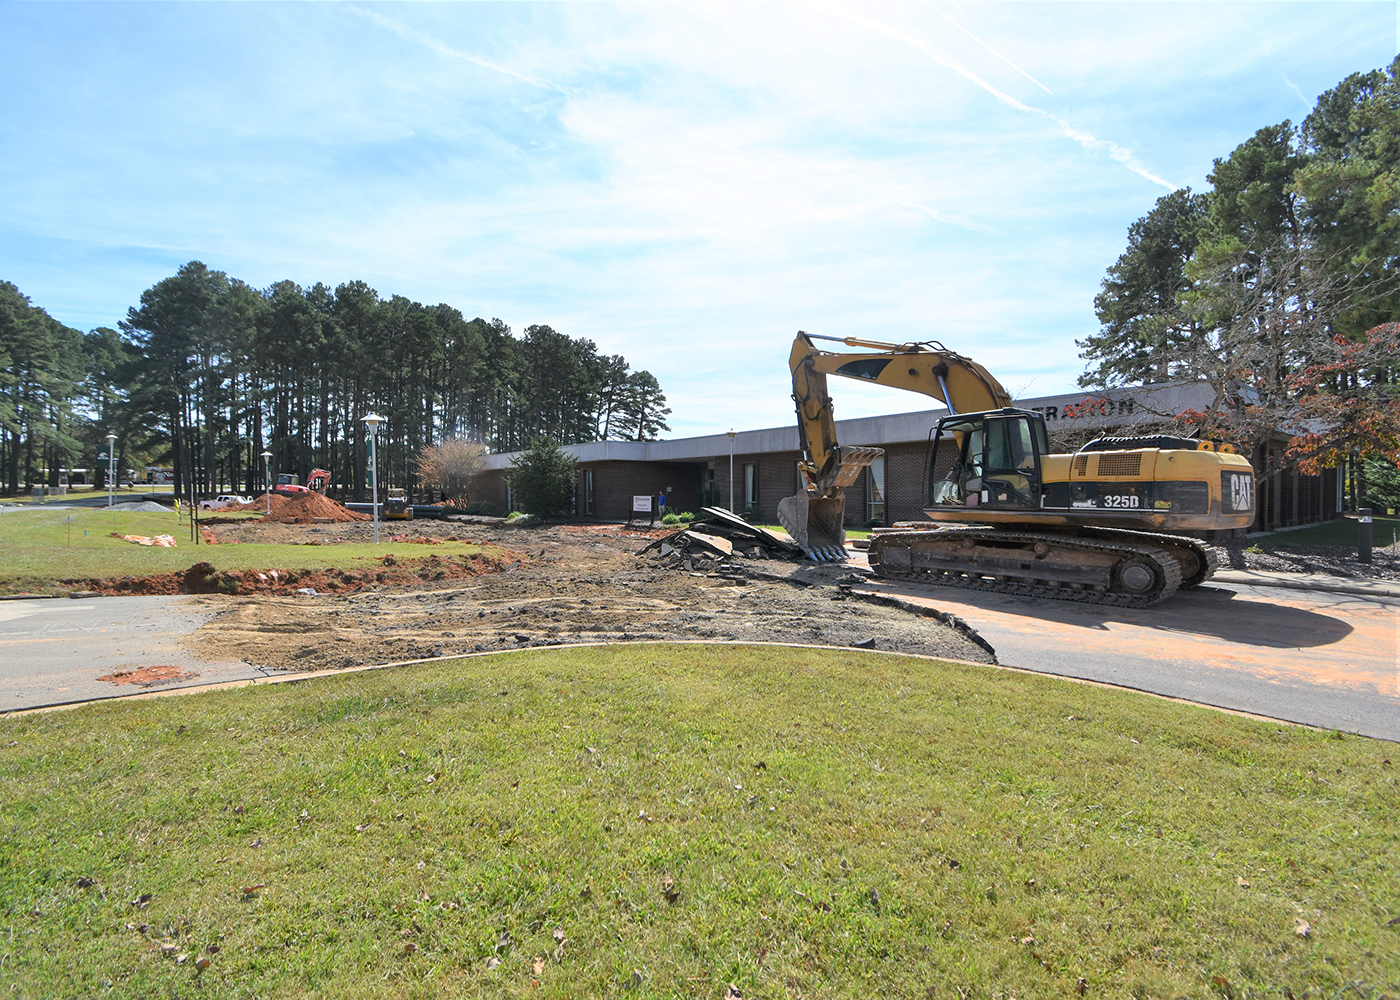 Crews are removing the parking lot of the Administration building, so the lot can be expanded, 10/6/2022.